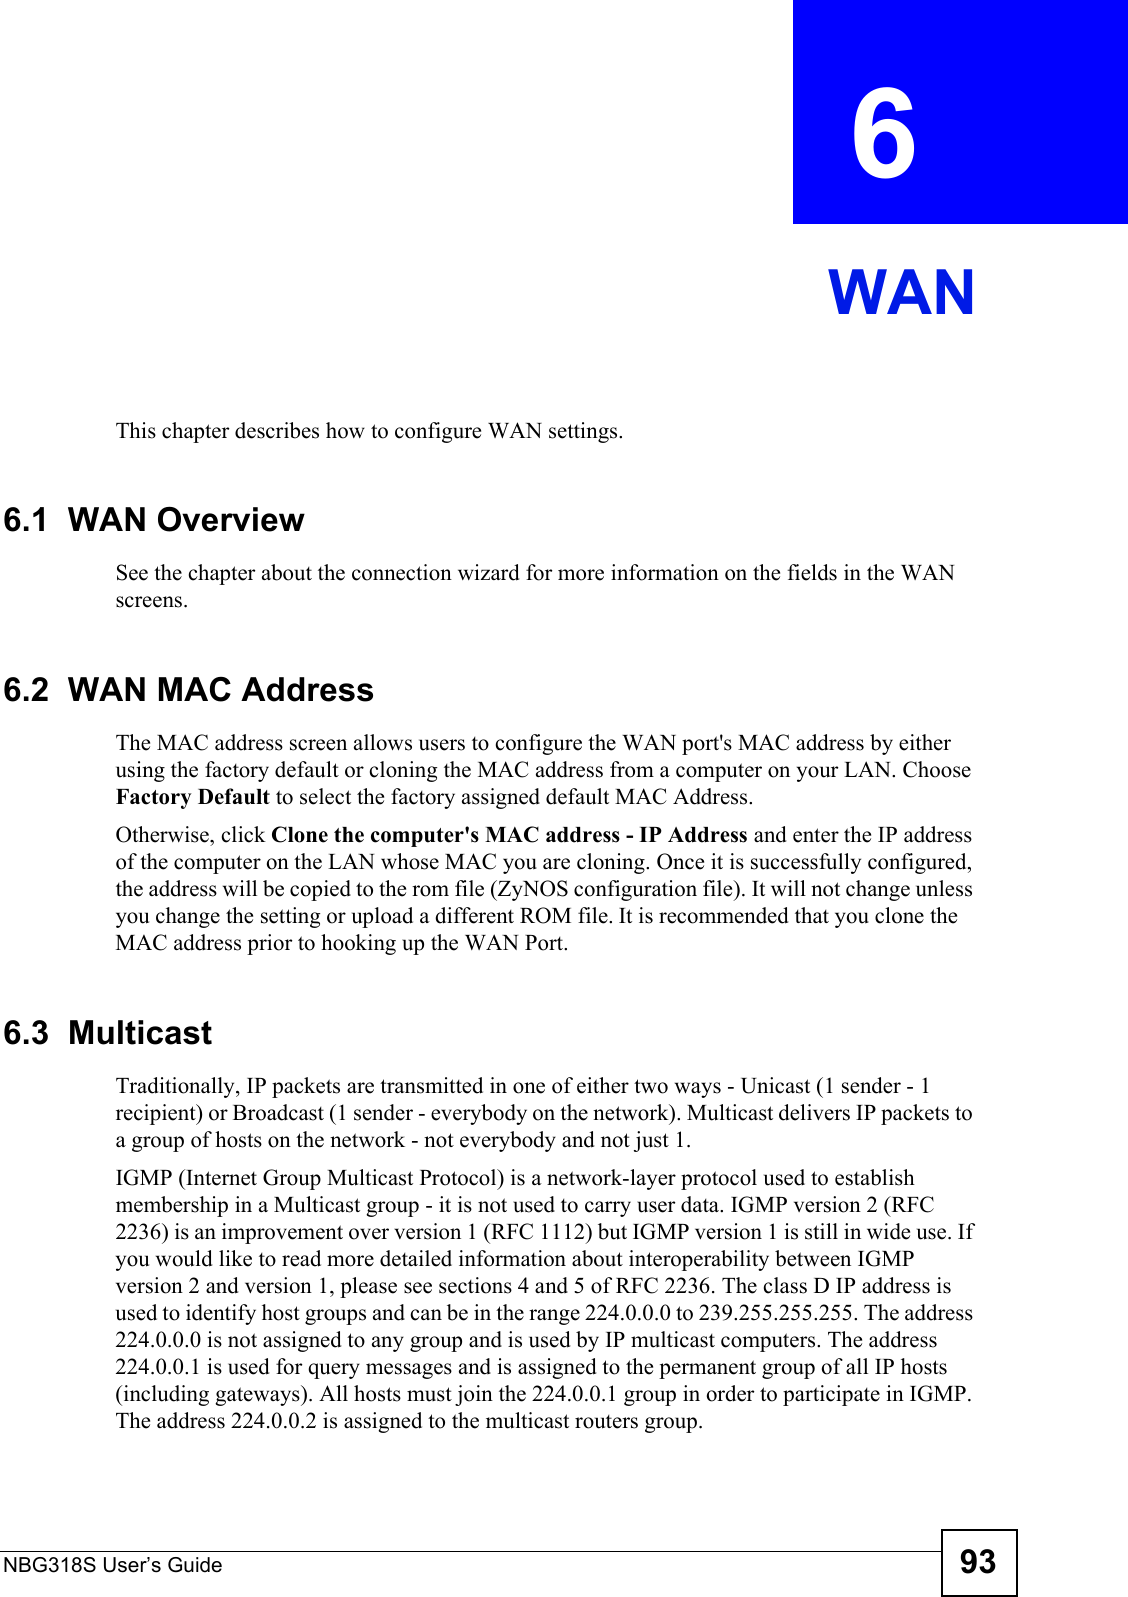 NBG318S User’s Guide 93CHAPTER  6 WANThis chapter describes how to configure WAN settings.6.1  WAN OverviewSee the chapter about the connection wizard for more information on the fields in the WAN screens.6.2  WAN MAC AddressThe MAC address screen allows users to configure the WAN port&apos;s MAC address by either using the factory default or cloning the MAC address from a computer on your LAN. Choose Factory Default to select the factory assigned default MAC Address.Otherwise, click Clone the computer&apos;s MAC address - IP Address and enter the IP address of the computer on the LAN whose MAC you are cloning. Once it is successfully configured, the address will be copied to the rom file (ZyNOS configuration file). It will not change unless you change the setting or upload a different ROM file. It is recommended that you clone the MAC address prior to hooking up the WAN Port.6.3  MulticastTraditionally, IP packets are transmitted in one of either two ways - Unicast (1 sender - 1 recipient) or Broadcast (1 sender - everybody on the network). Multicast delivers IP packets to a group of hosts on the network - not everybody and not just 1. IGMP (Internet Group Multicast Protocol) is a network-layer protocol used to establish membership in a Multicast group - it is not used to carry user data. IGMP version 2 (RFC 2236) is an improvement over version 1 (RFC 1112) but IGMP version 1 is still in wide use. If you would like to read more detailed information about interoperability between IGMP version 2 and version 1, please see sections 4 and 5 of RFC 2236. The class D IP address is used to identify host groups and can be in the range 224.0.0.0 to 239.255.255.255. The address 224.0.0.0 is not assigned to any group and is used by IP multicast computers. The address 224.0.0.1 is used for query messages and is assigned to the permanent group of all IP hosts (including gateways). All hosts must join the 224.0.0.1 group in order to participate in IGMP. The address 224.0.0.2 is assigned to the multicast routers group. 